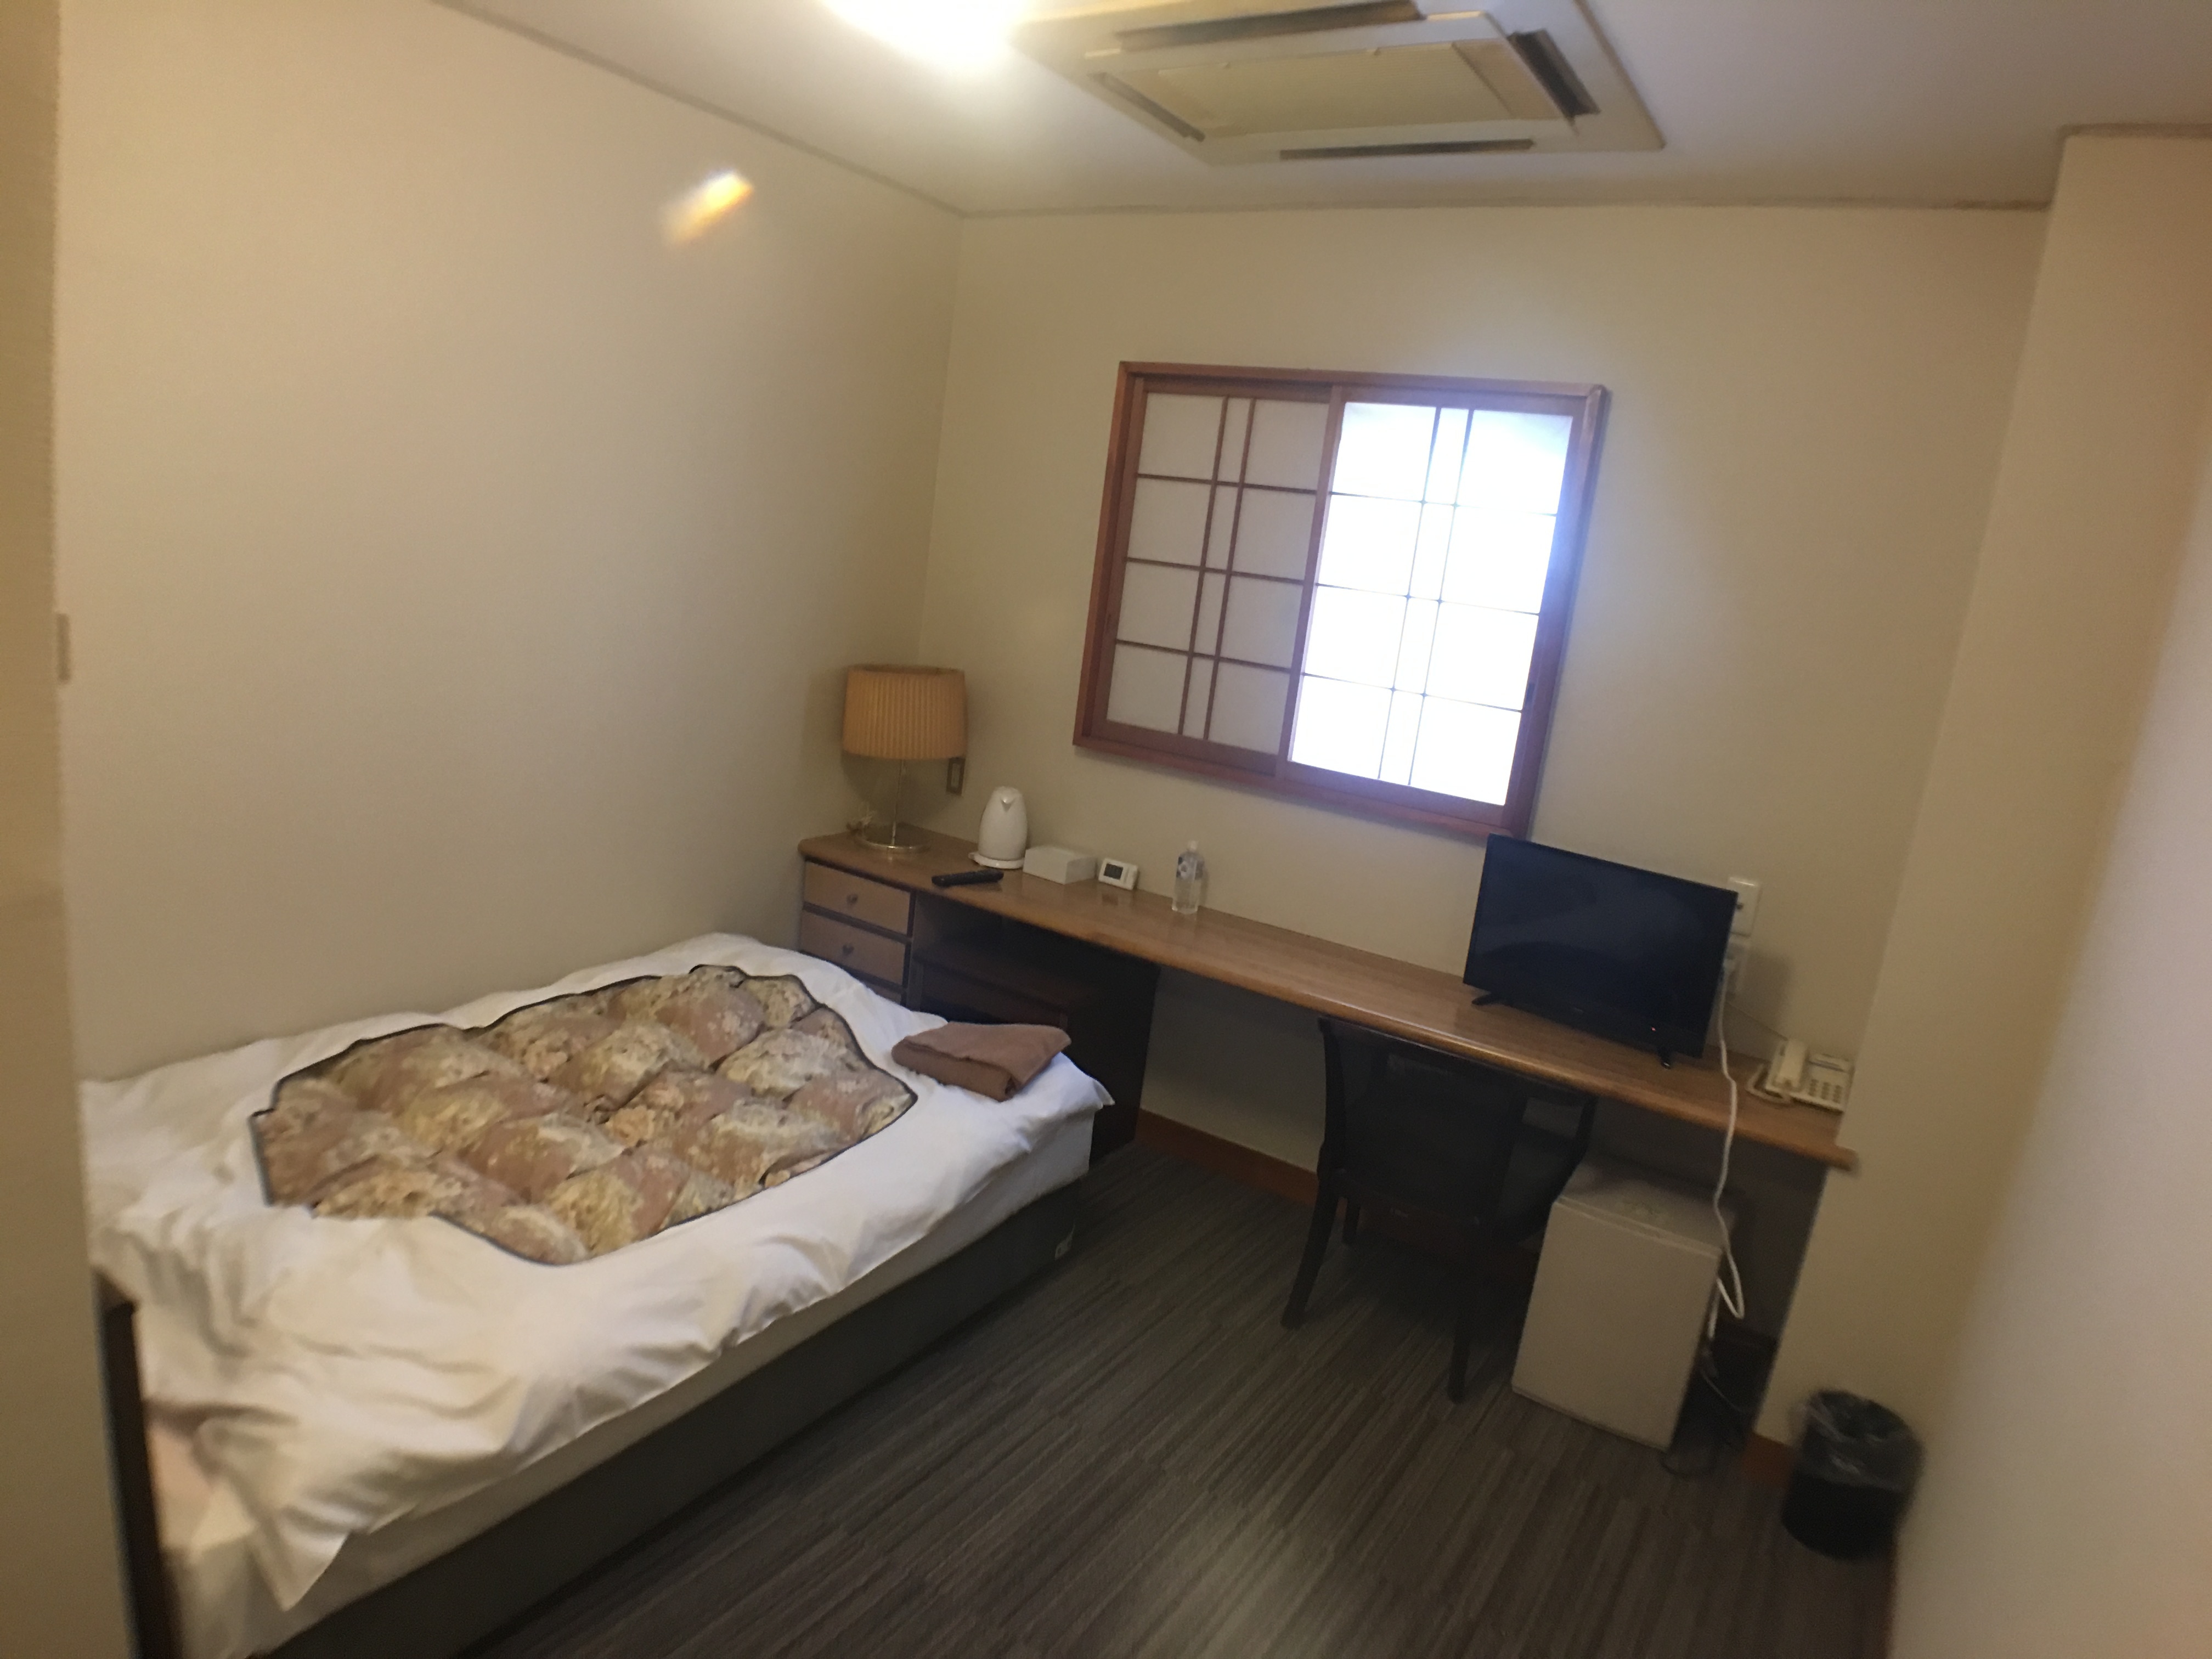 Single room is also spacious ♪ Free Wi-Fi connection in all rooms